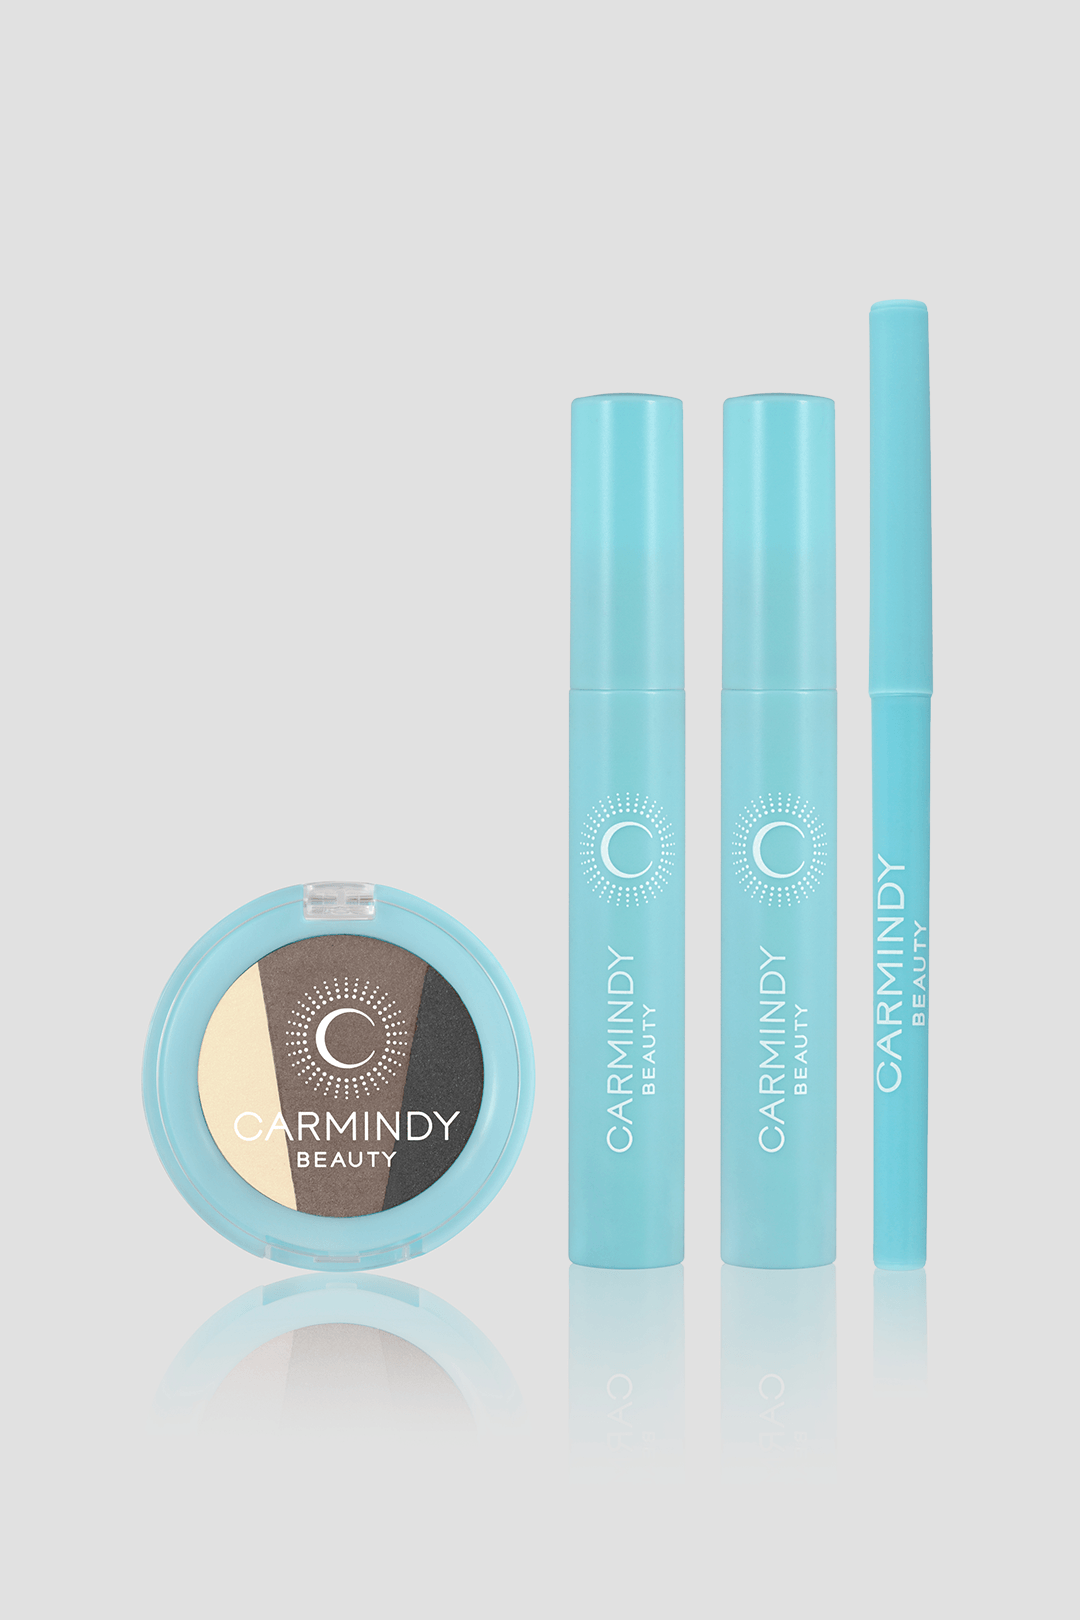 SULTRY EYES BUNDLE - SCENT BEAUTY